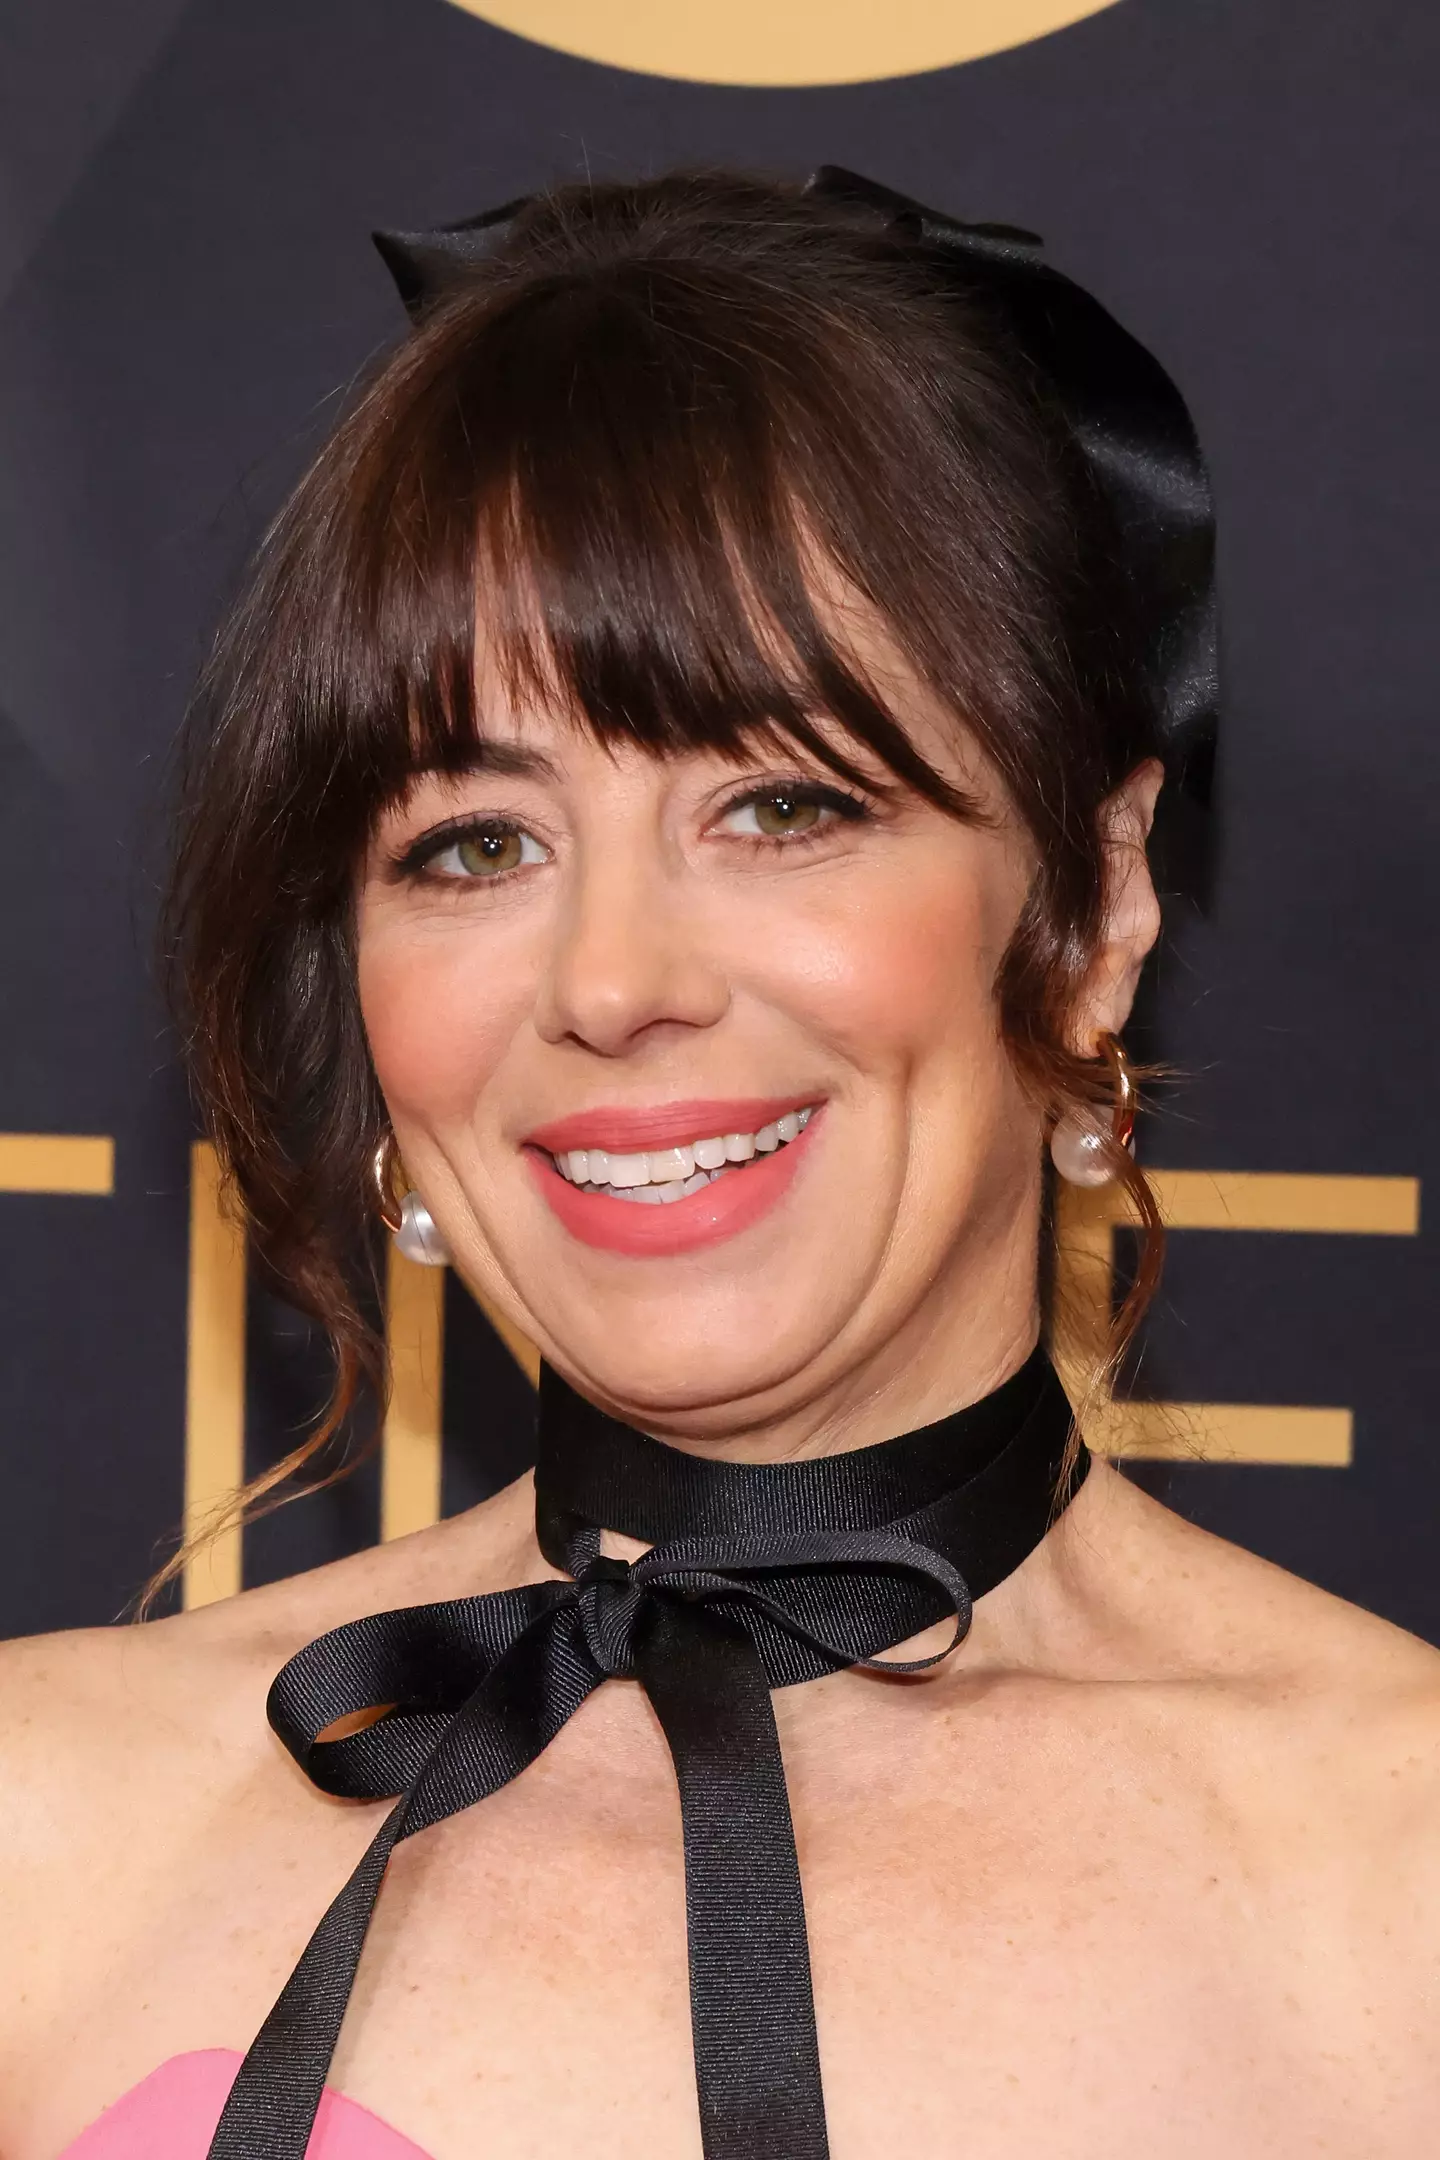 Natasha Leggero made an important point at one of her shows.